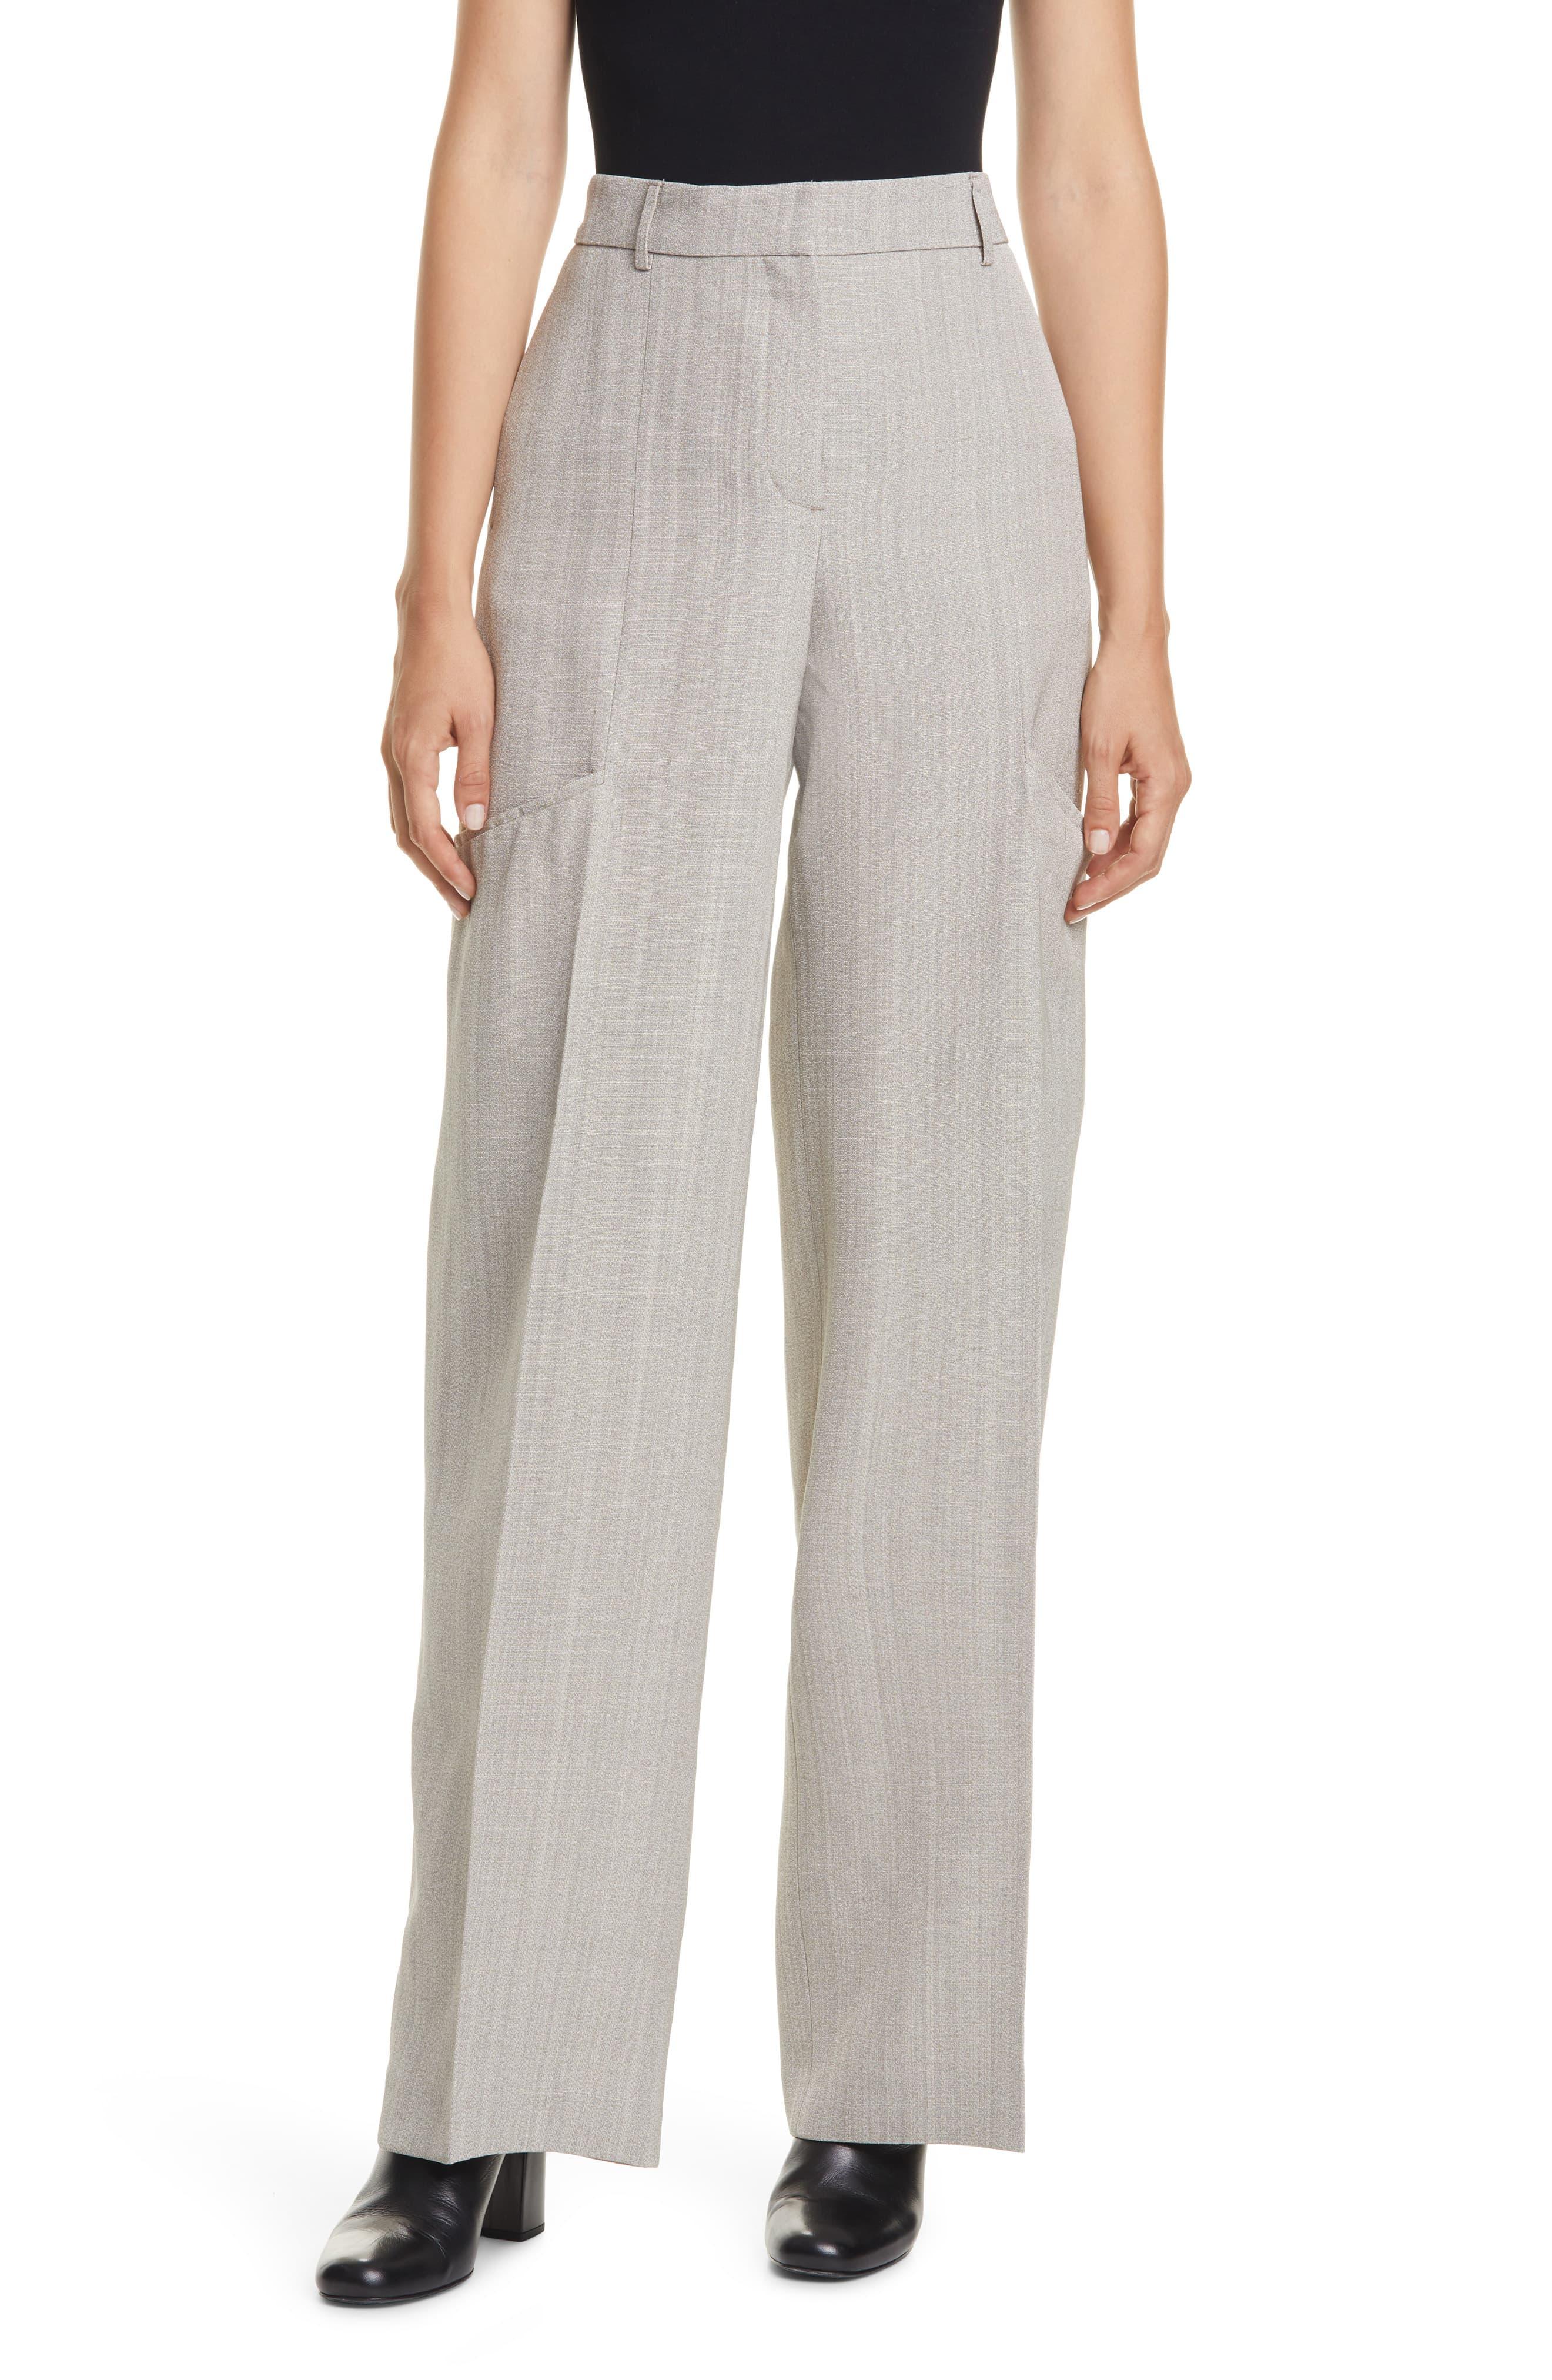 Jacquemus High Waist Wide Leg Trousers in Gray - Lyst